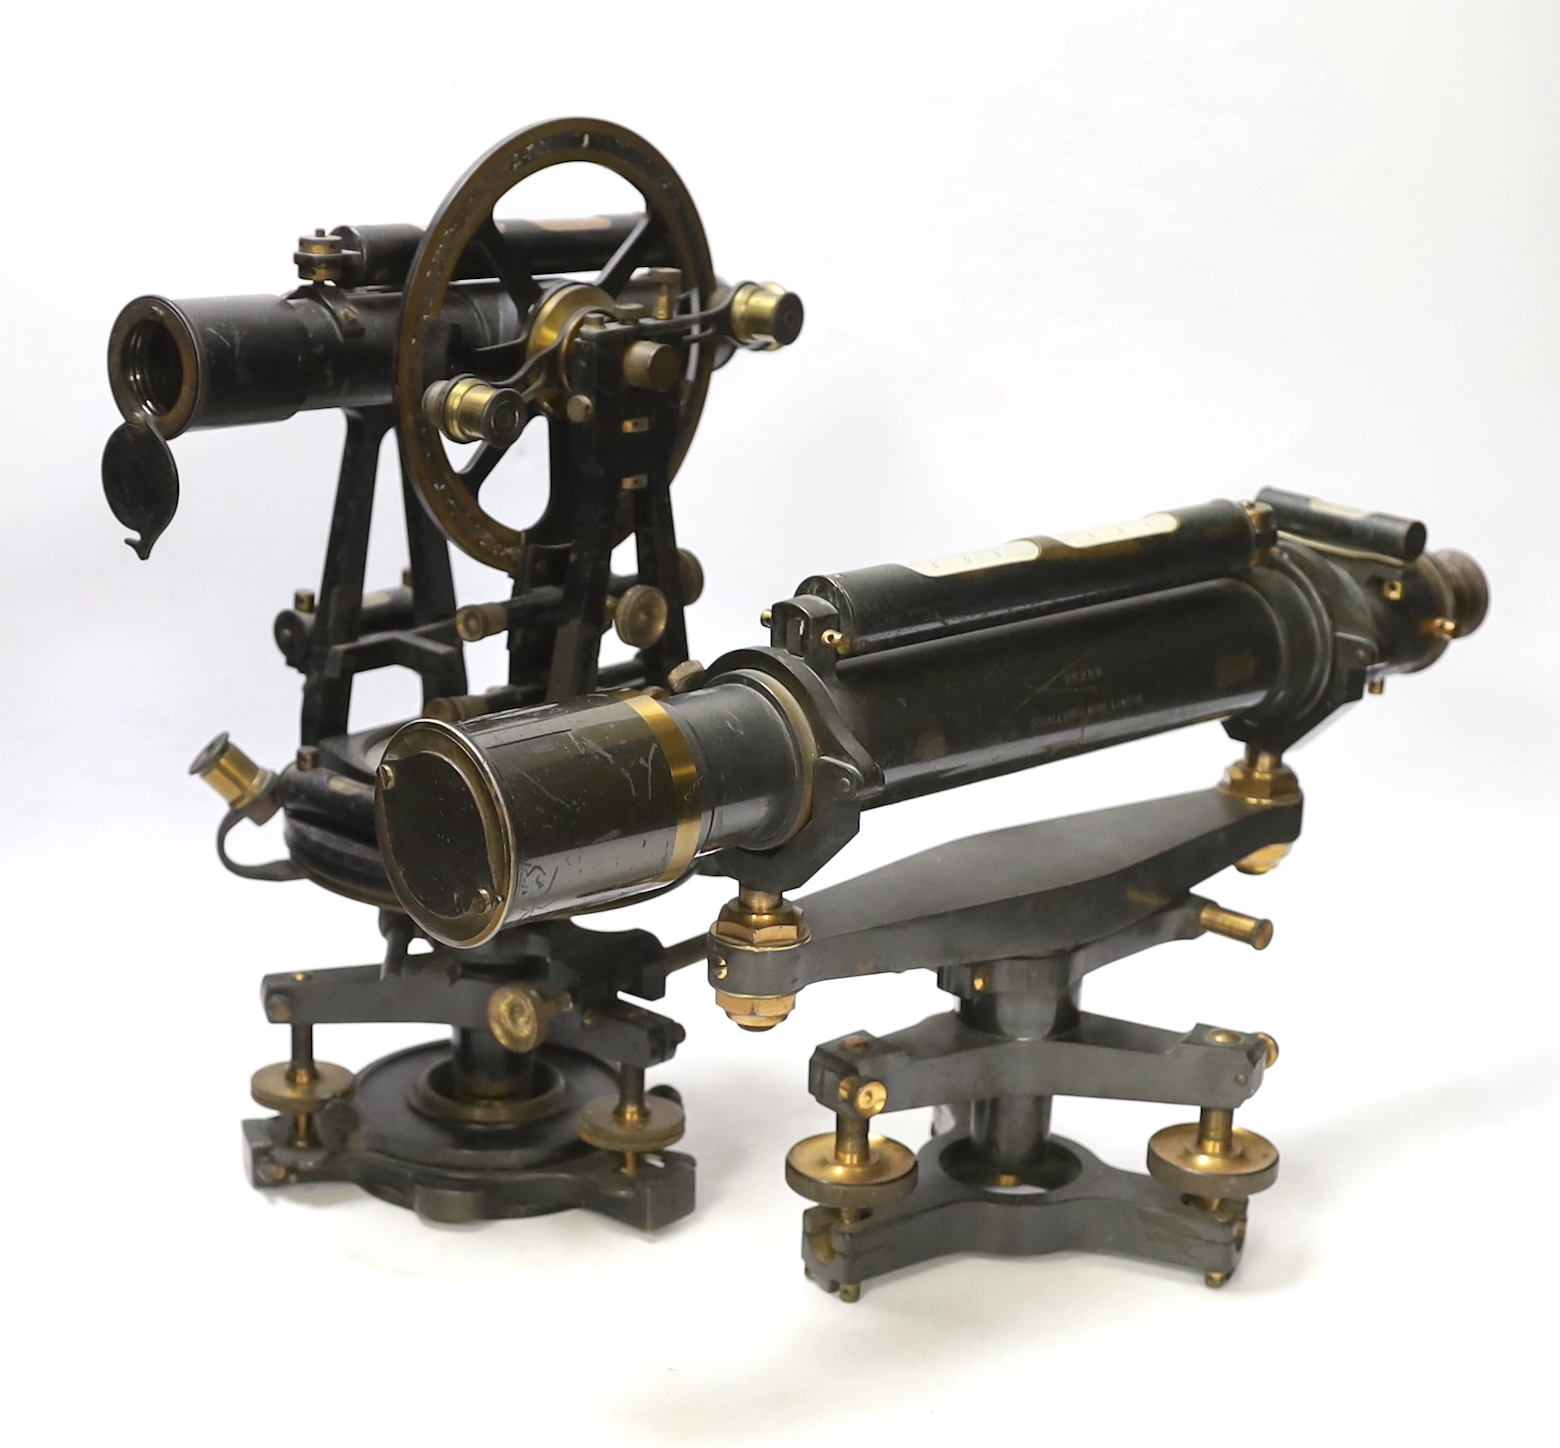 An early 20th century micrometer theodolite by Heath & Co. ‘Hezzanith’, Crawford, London, and an